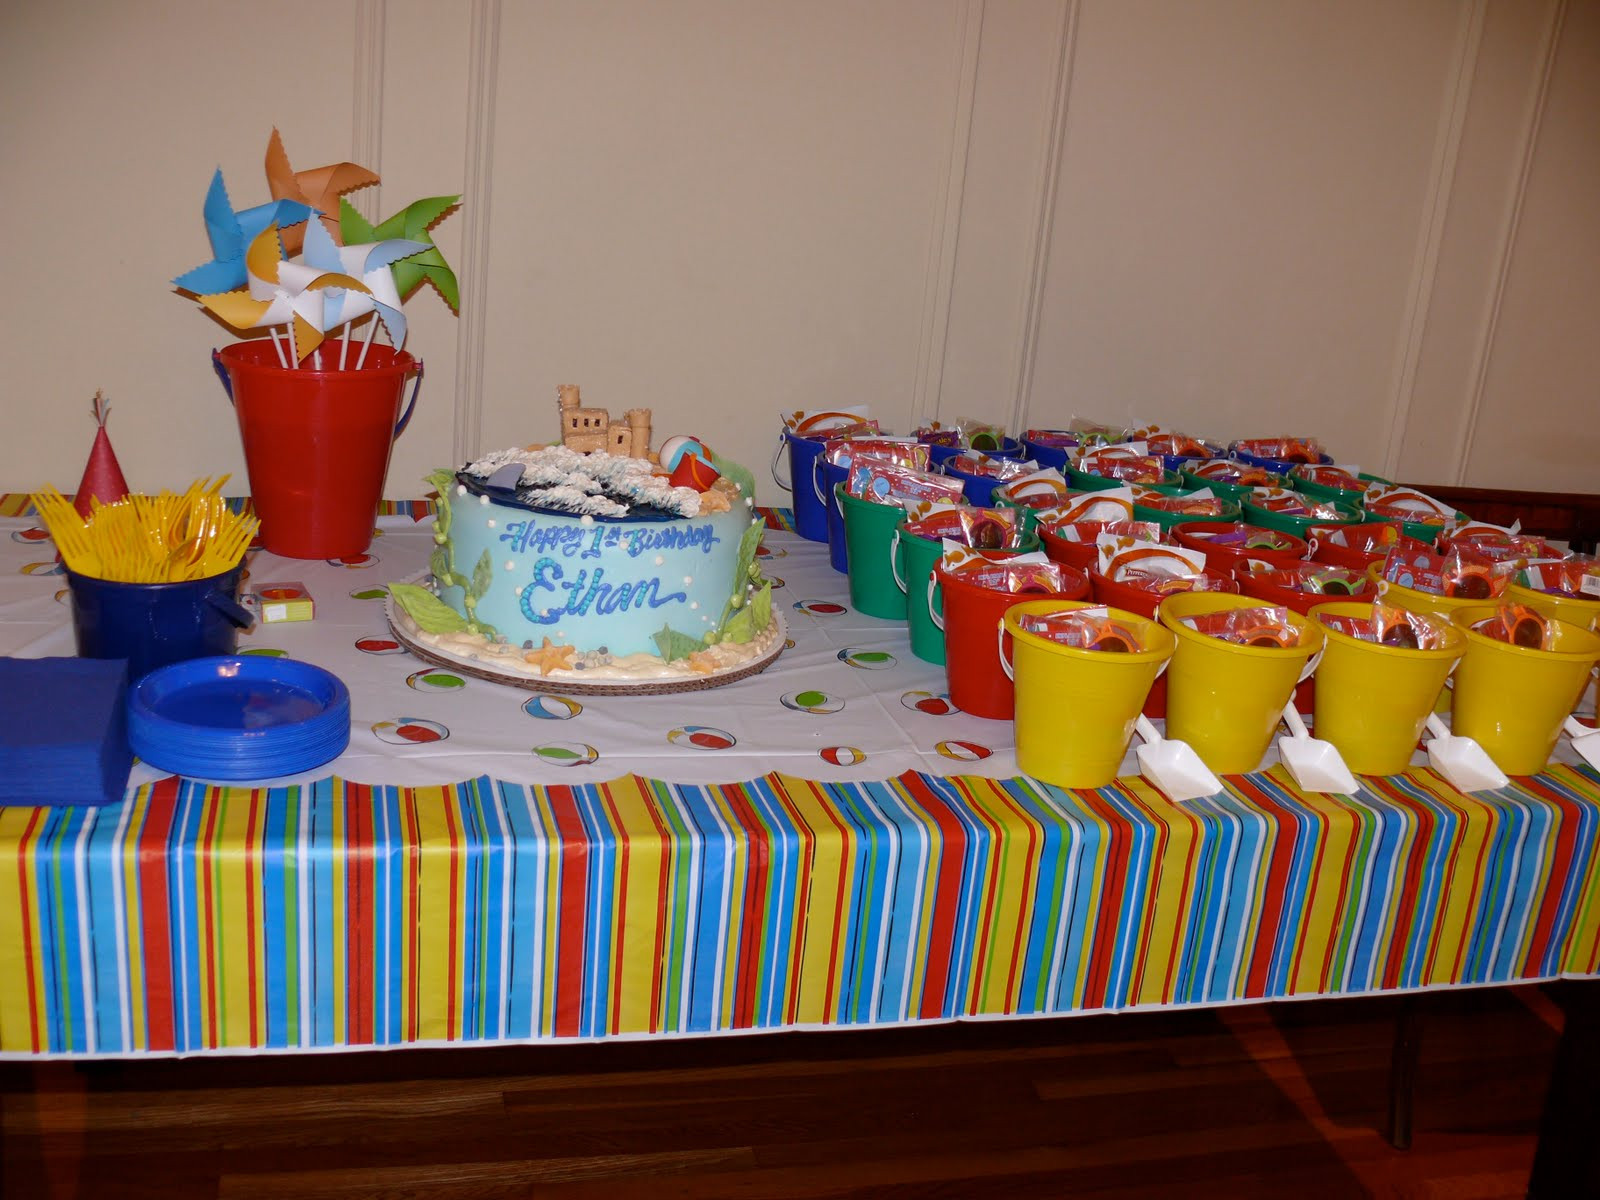 Beach Birthday Party Ideas For Kids
 Stylish Childrens Parties Beach First Birthday Party